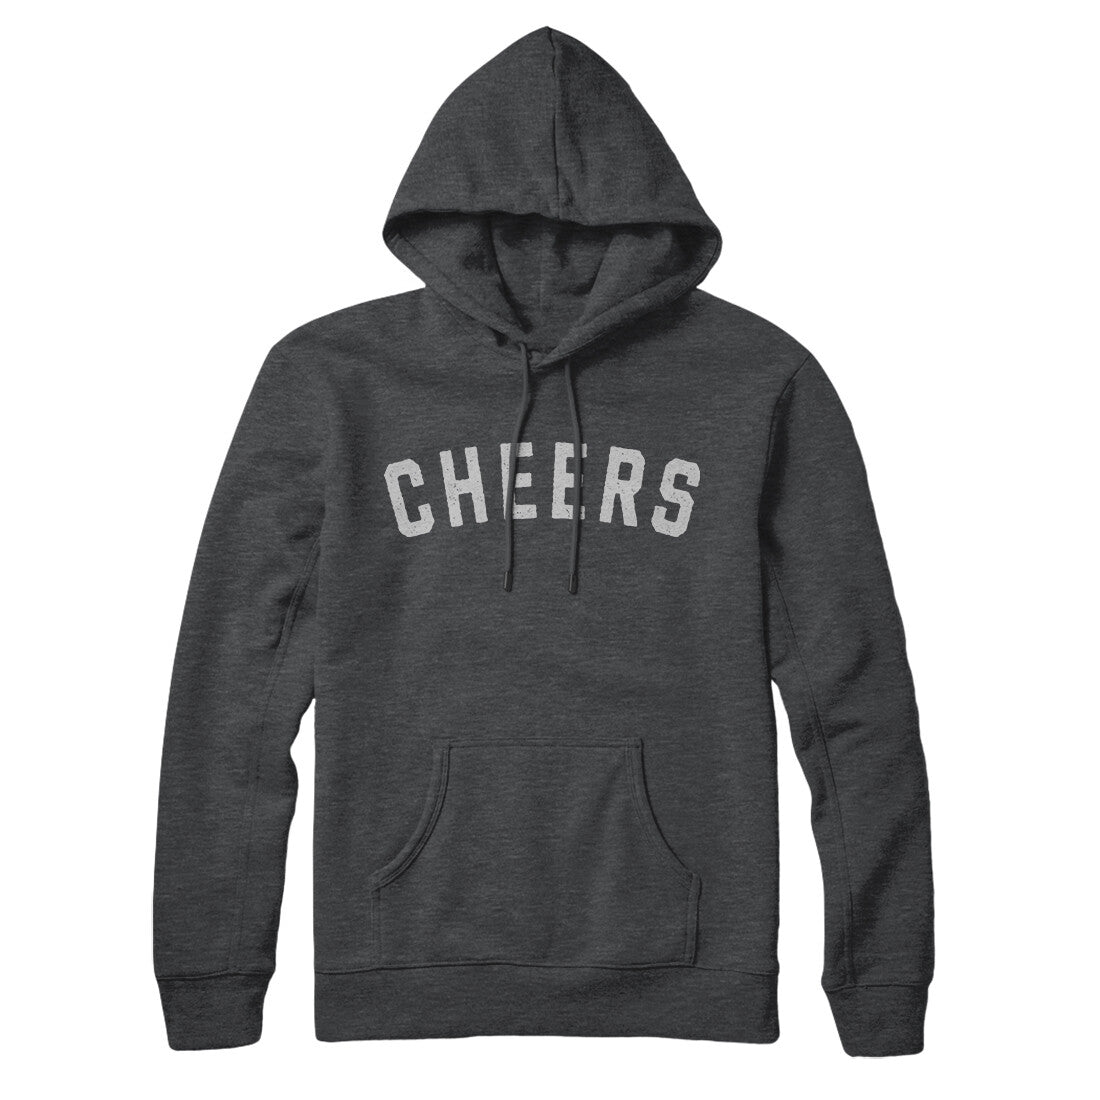 Cheers in Charcoal Heather Color